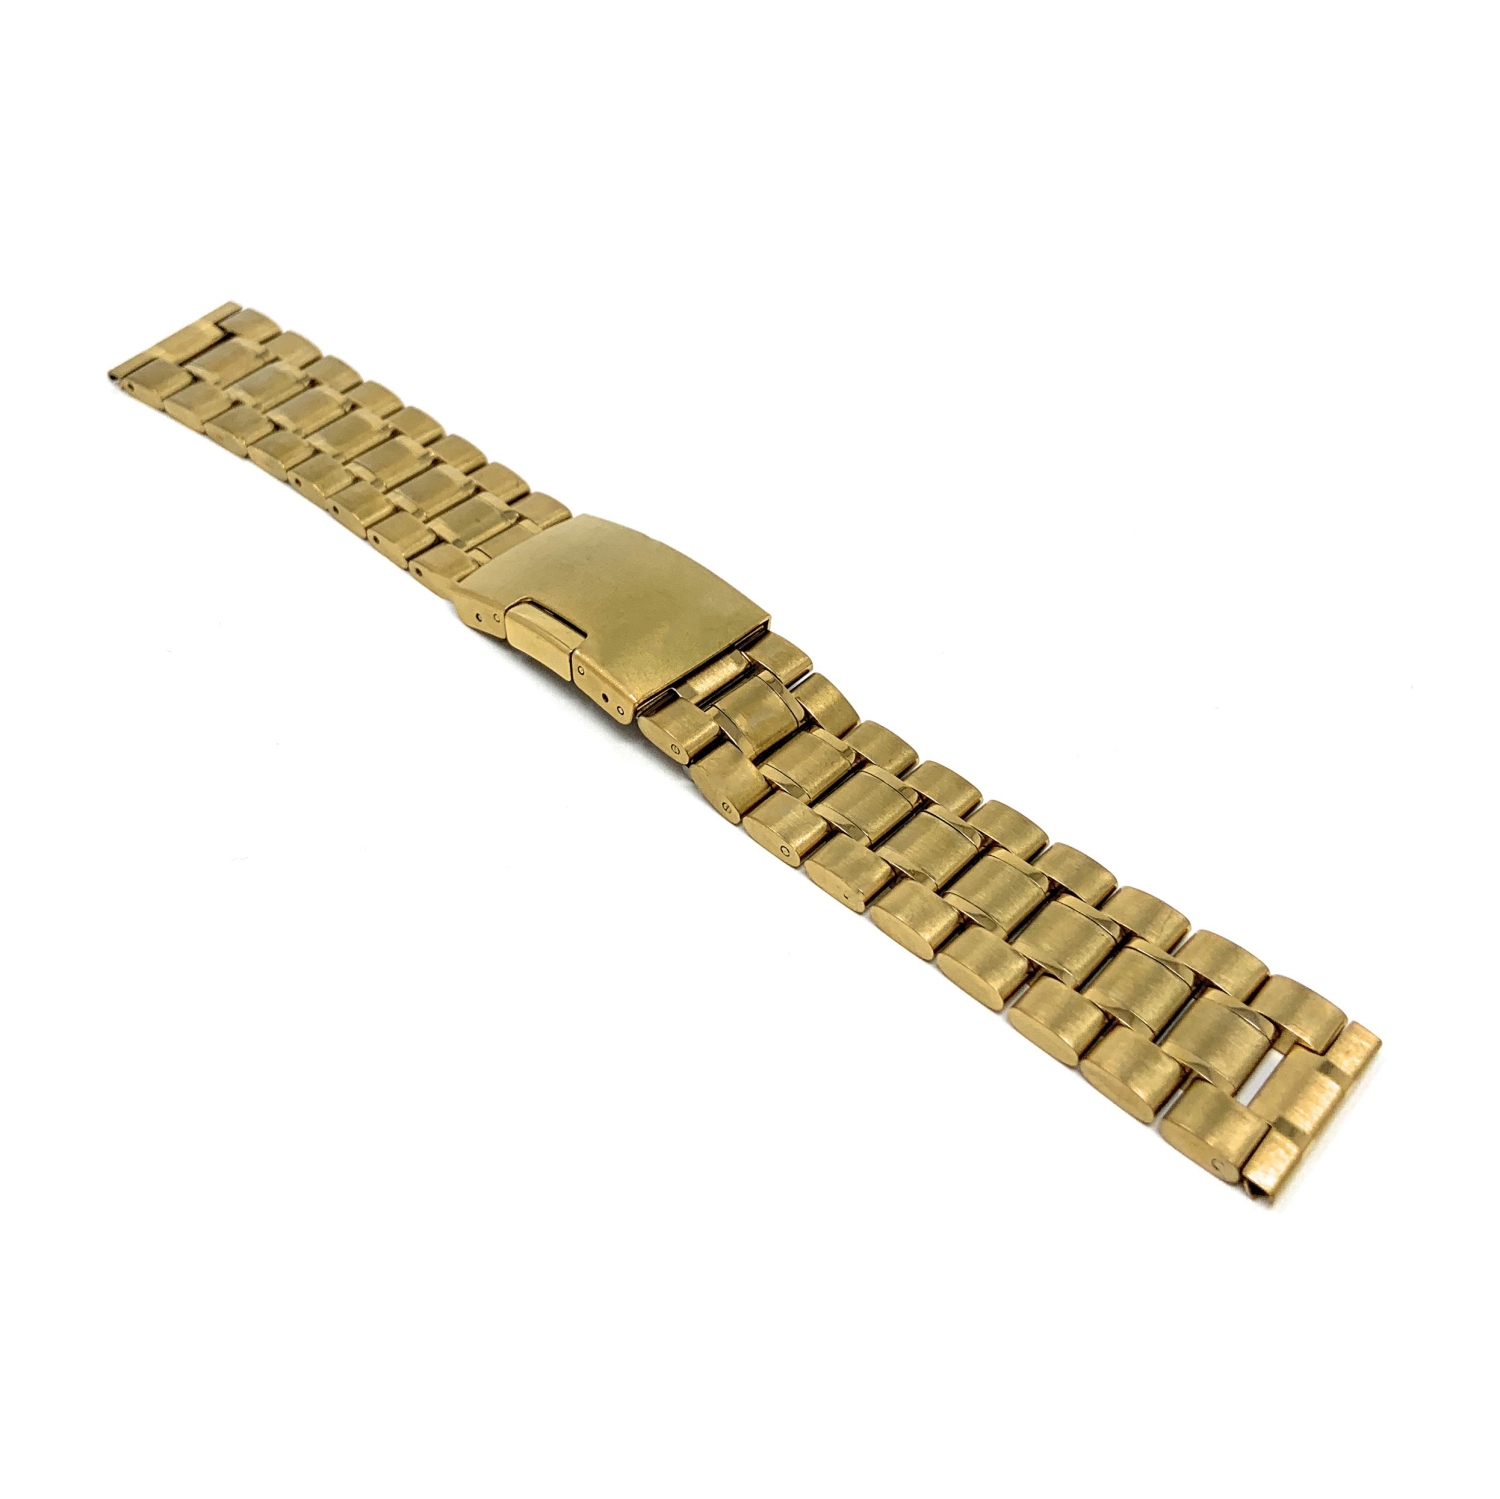 Bandini Stainless Steel Smart Watch Band Strap For Mobvoi Ticwatch E2, S2, Pro, Pro 3 - 22mm, Gold